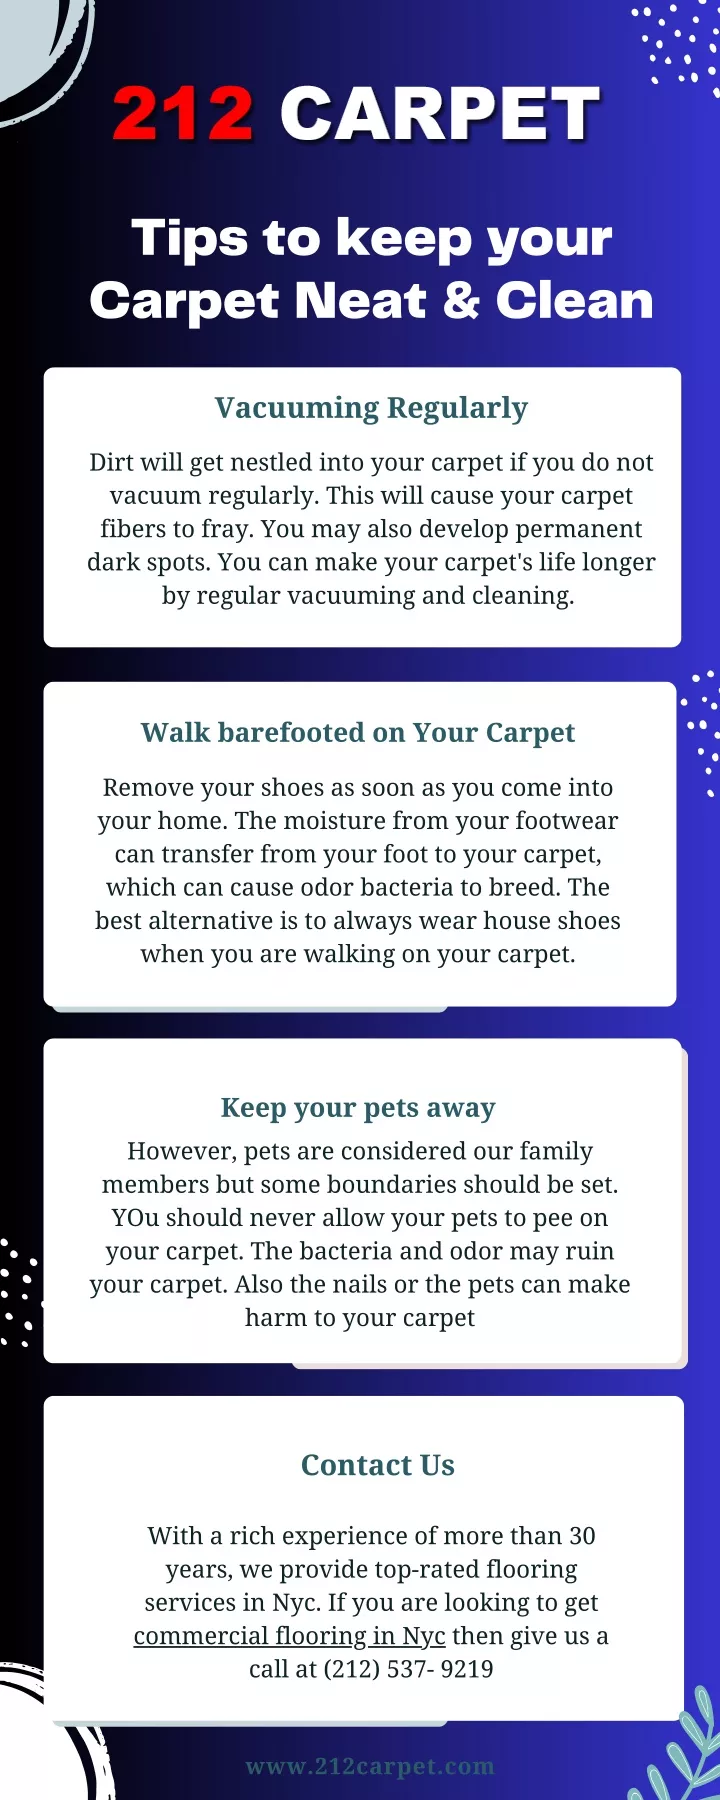 tips to keep your carpet neat clean